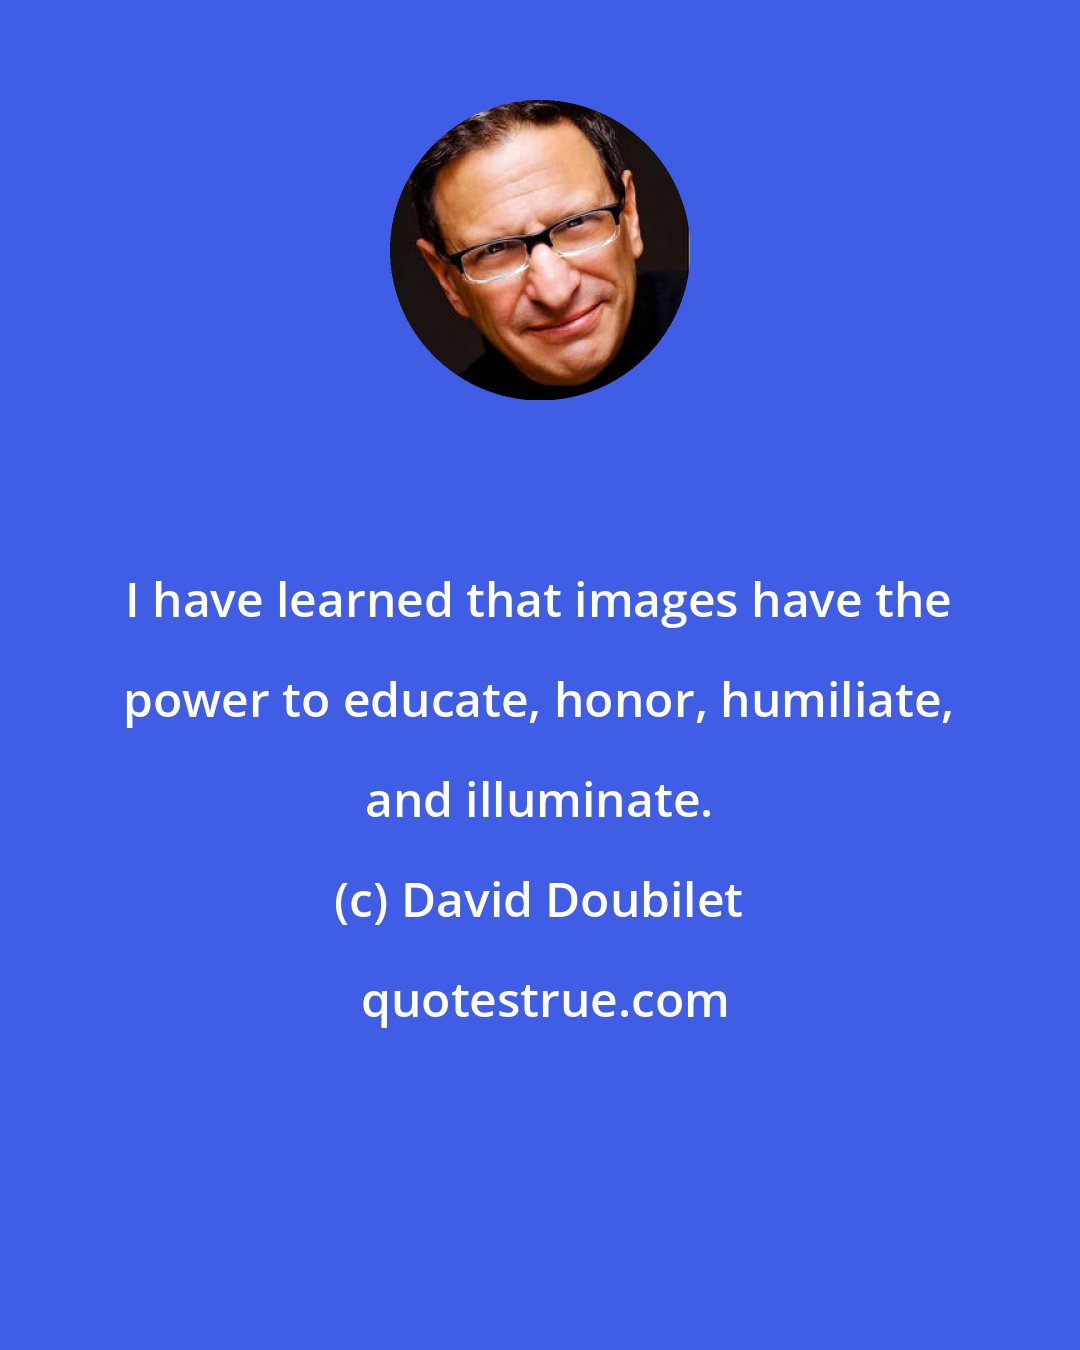 David Doubilet: I have learned that images have the power to educate, honor, humiliate, and illuminate.